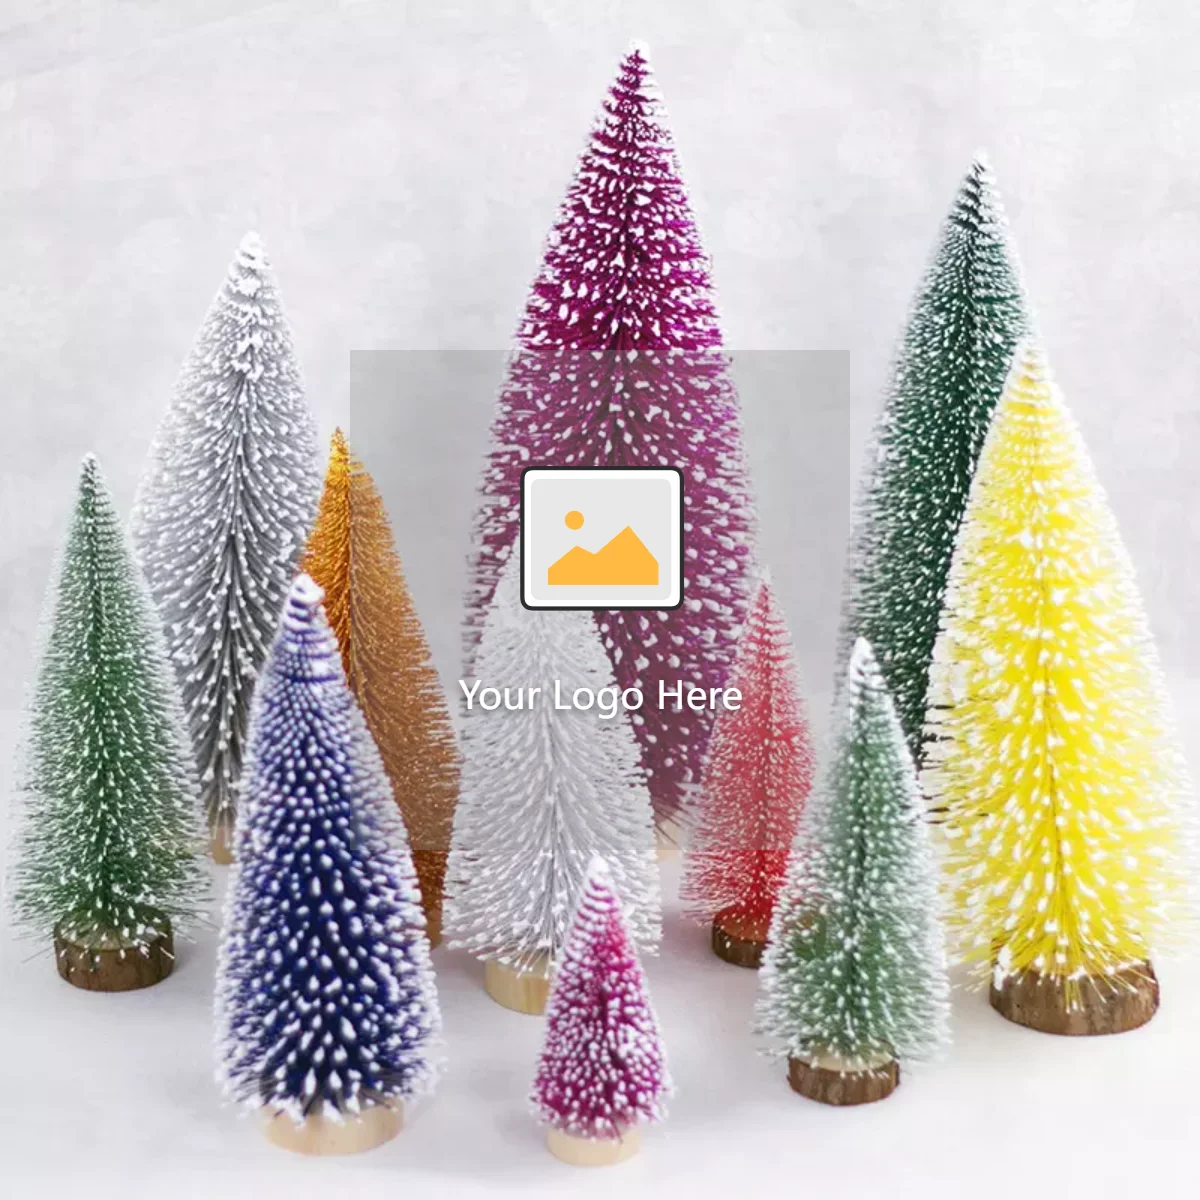 Xueliee 24Pcs Mini Sisal Snow Frost Trees Bottle Brush Trees Christmas Tree Mini Pine Tree with Wood Base for DIY Room Decor Home Table Top Decoration 